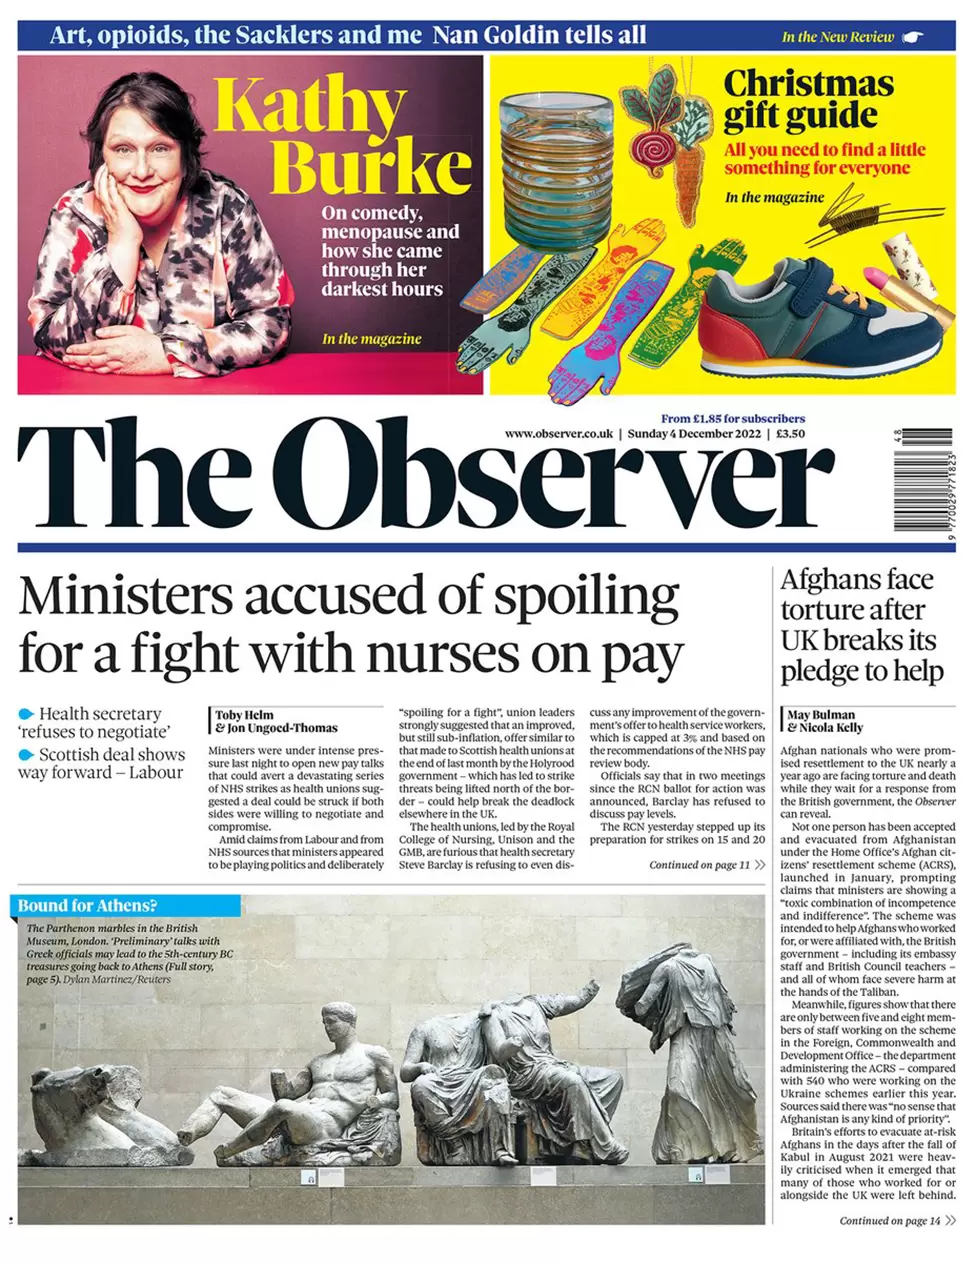 The Observer - Ministers accused of spoiling for a fight with nurses on pay